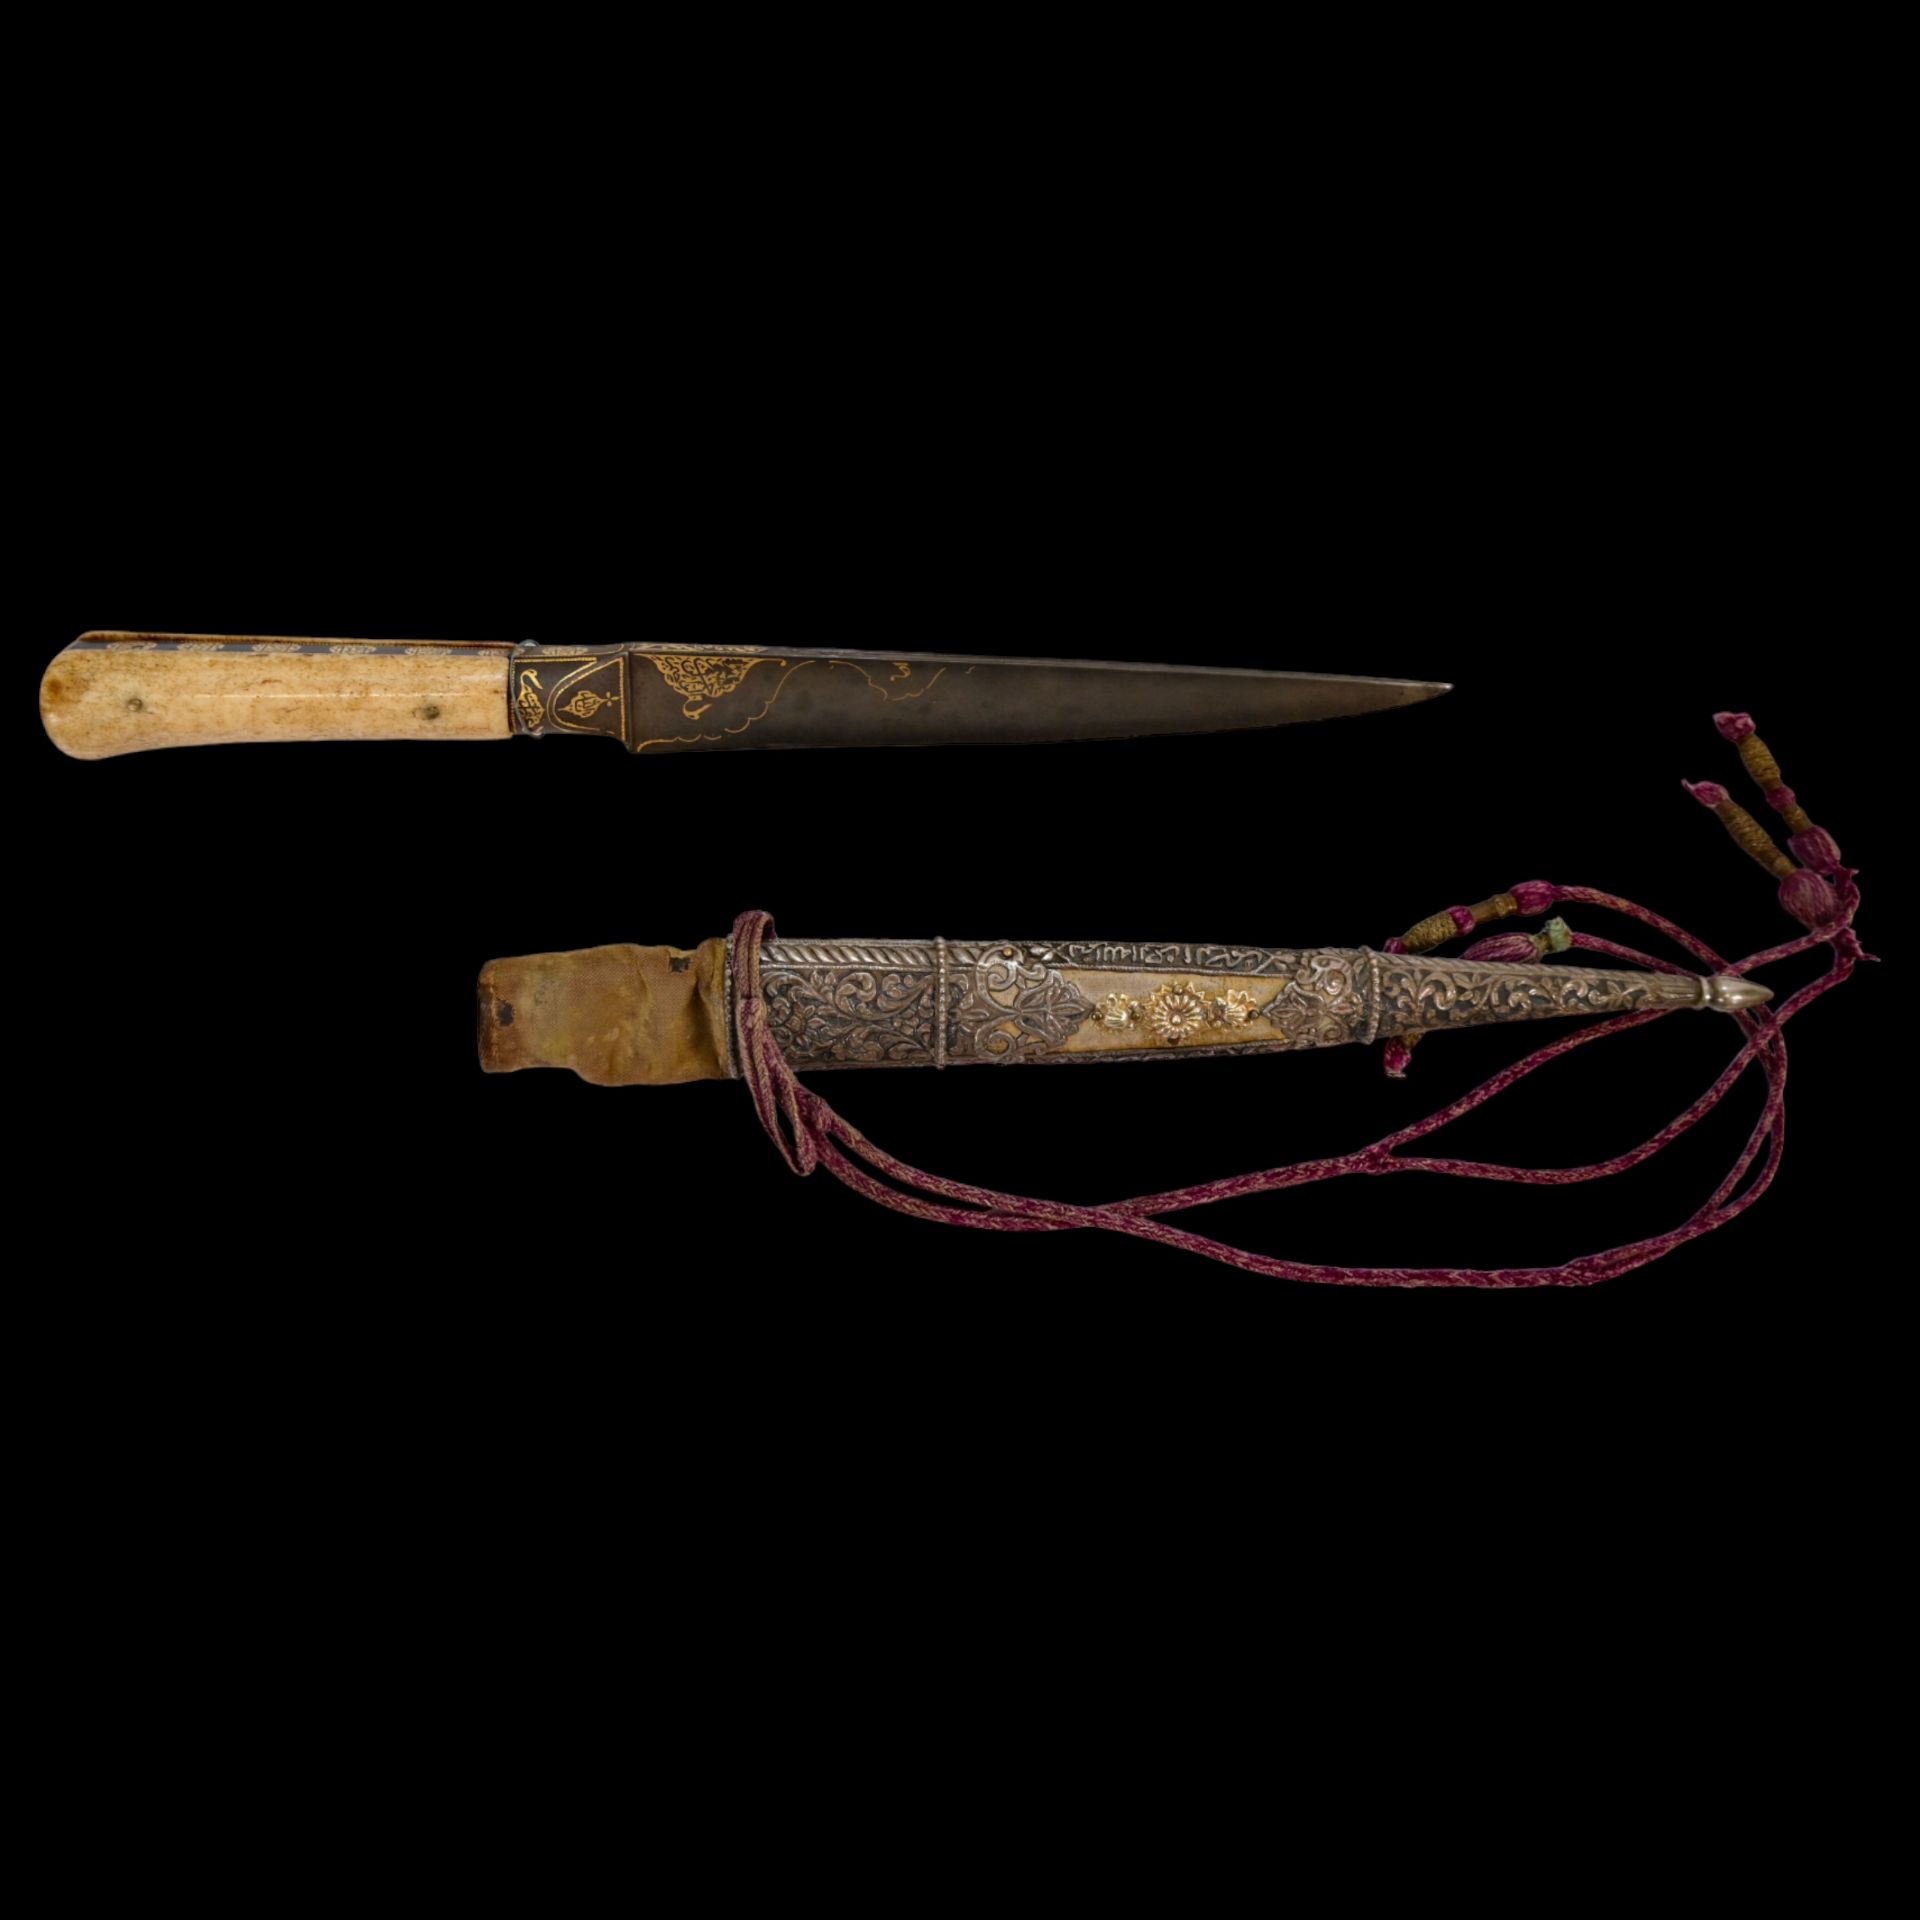 A PERSIAN ZAND DYNASTY KARD DAGGER WITH WOOTZ BLADE AND GOLD INLAY. - Image 21 of 27